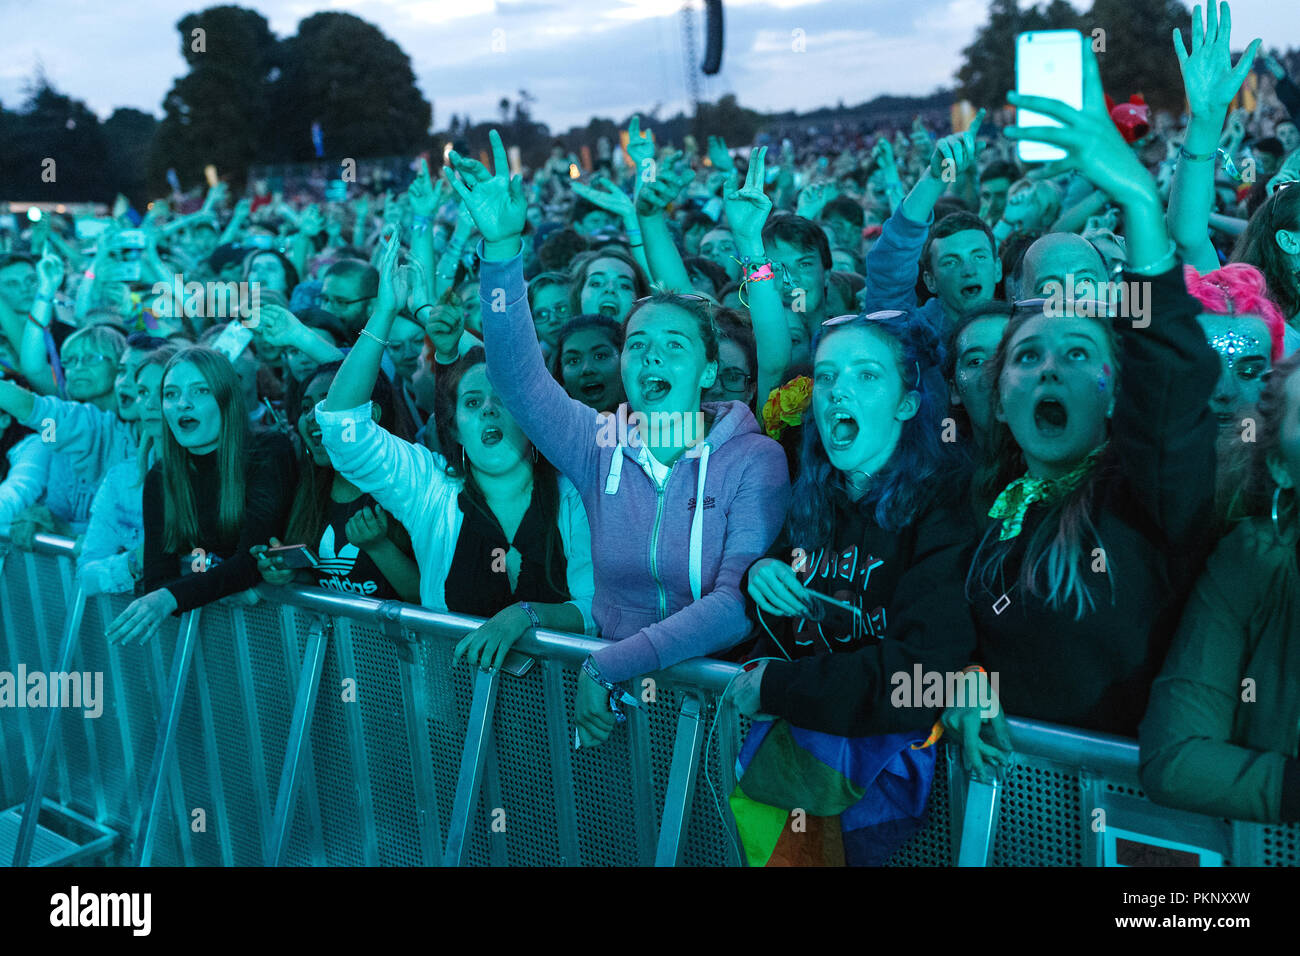 Young music fans at an outdoor music festival in the United Kingdom. Teenagers at a music festival, music festival crowd, teenage girls cheering, starstruck music fans. The festival pictured is Latitude Festival. Stock Photo